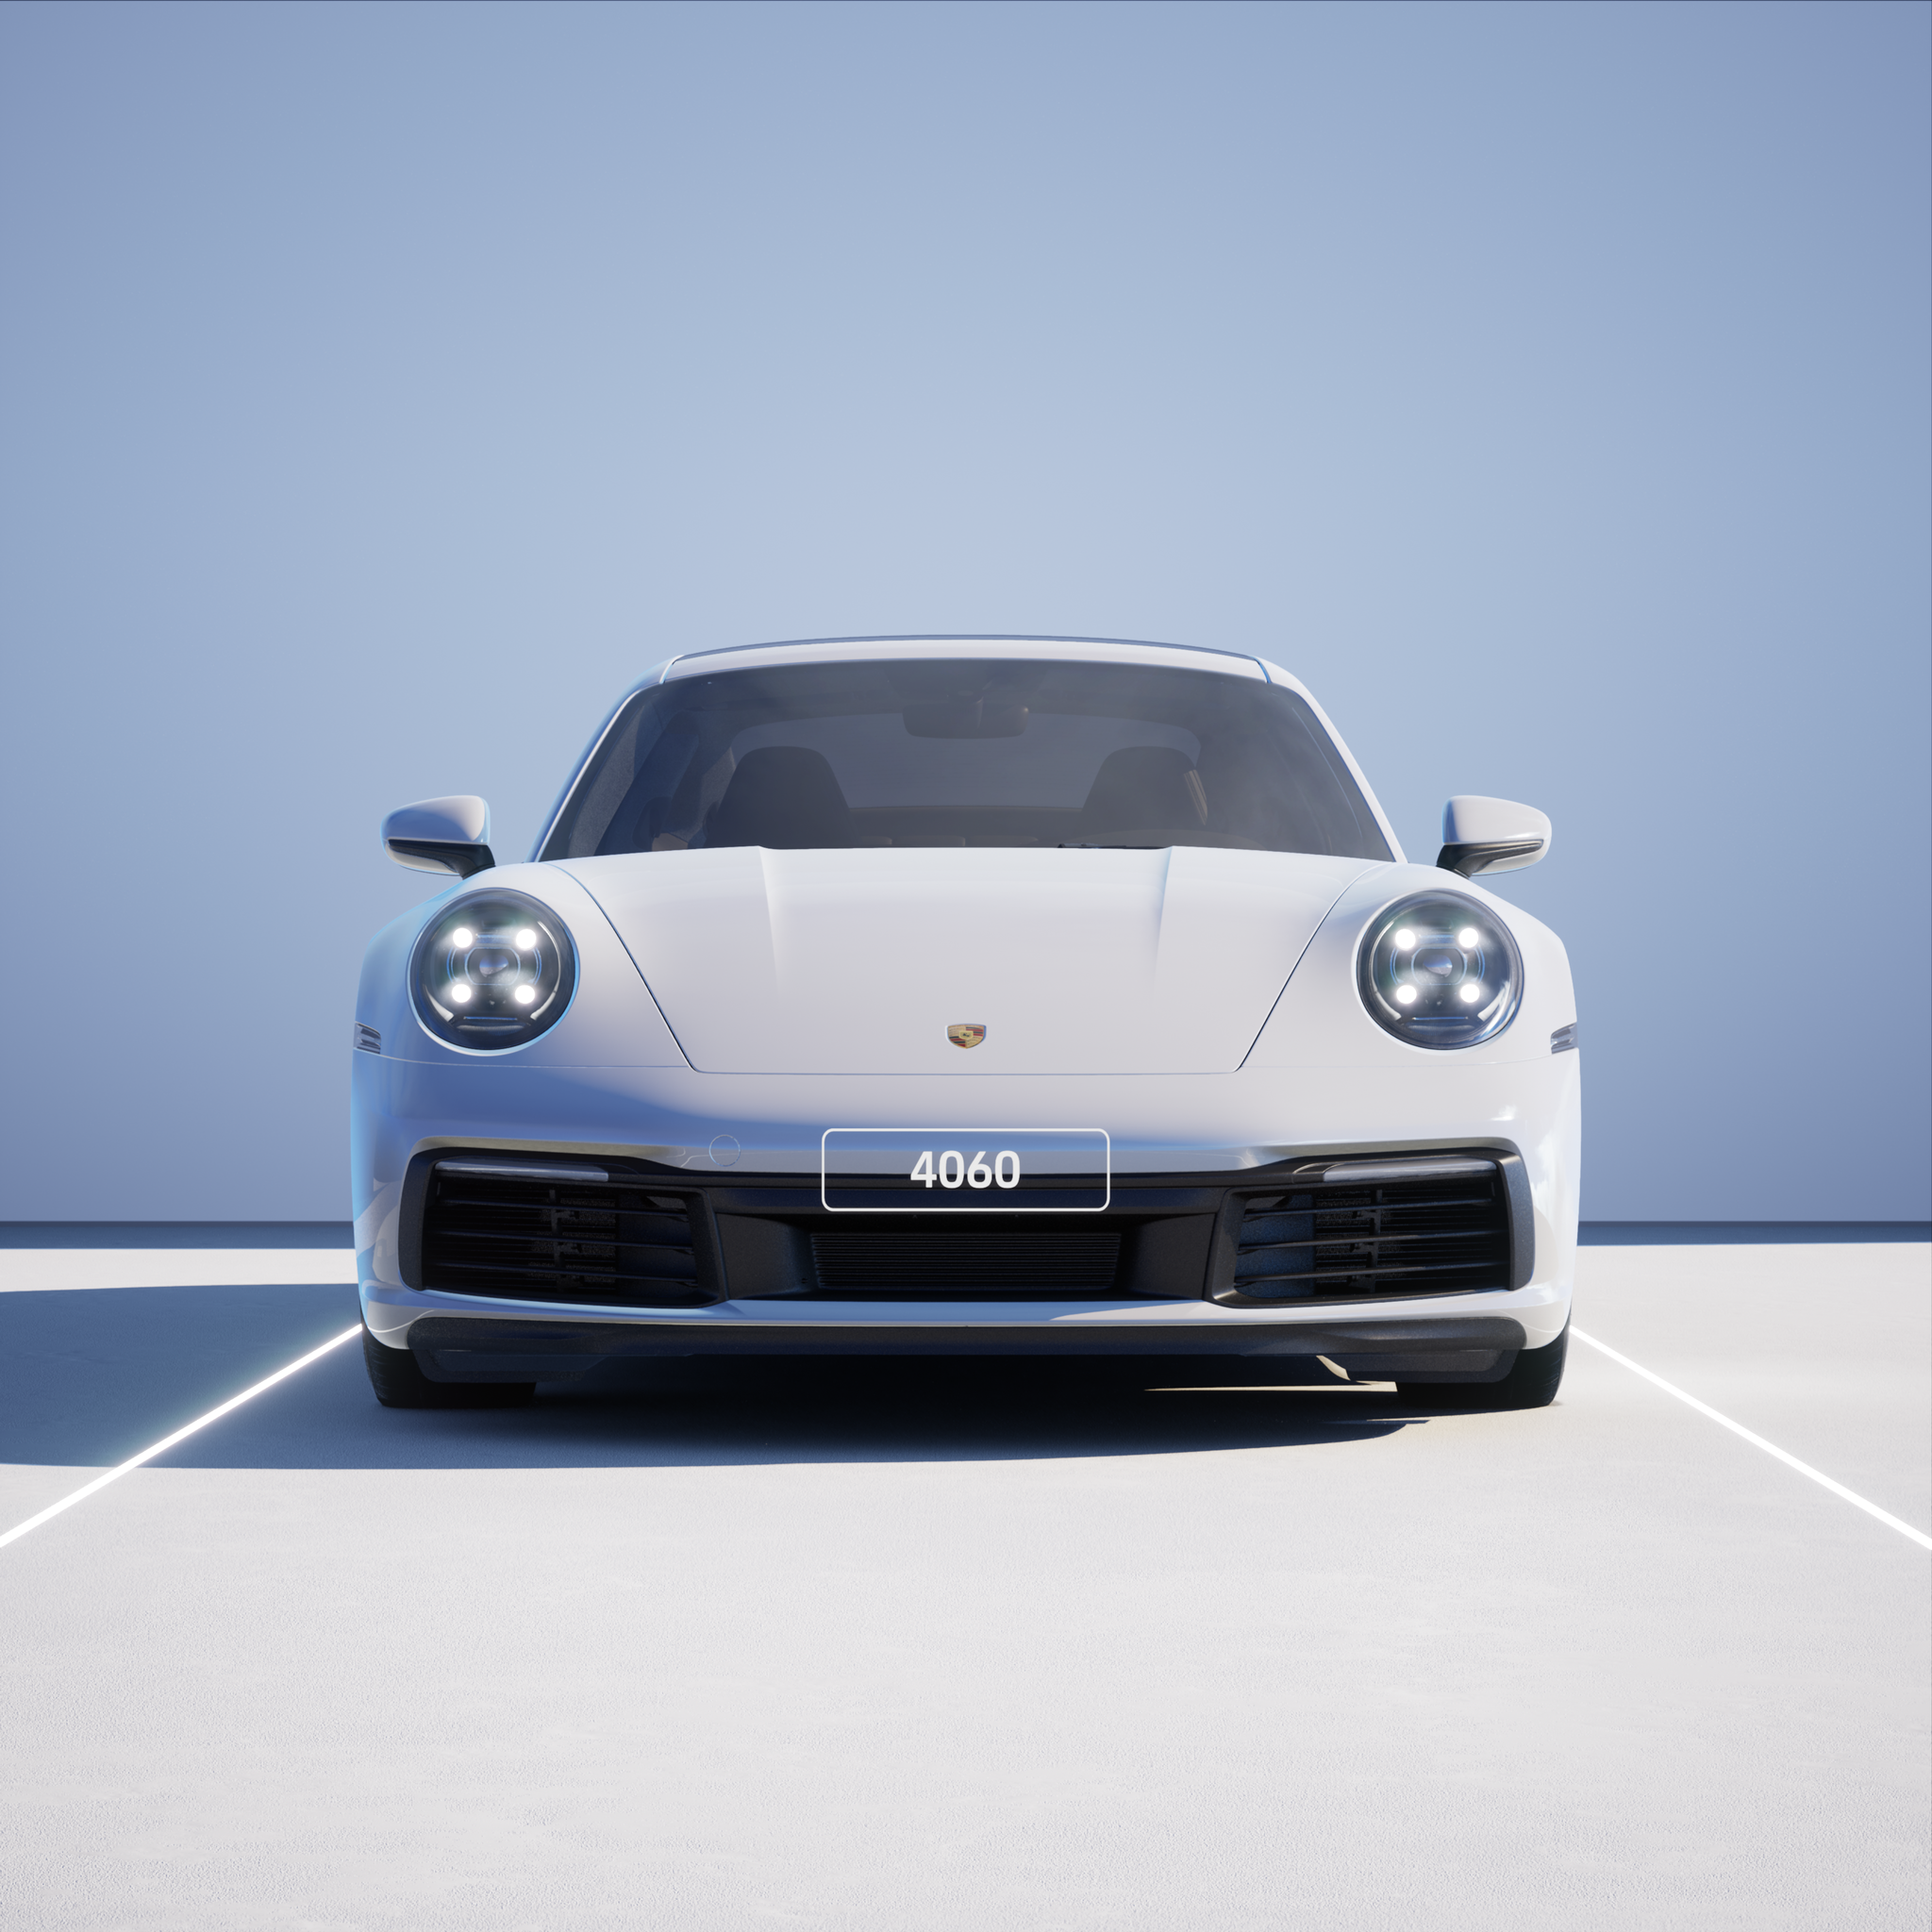 The PORSCHΞ 911 4060 image in phase